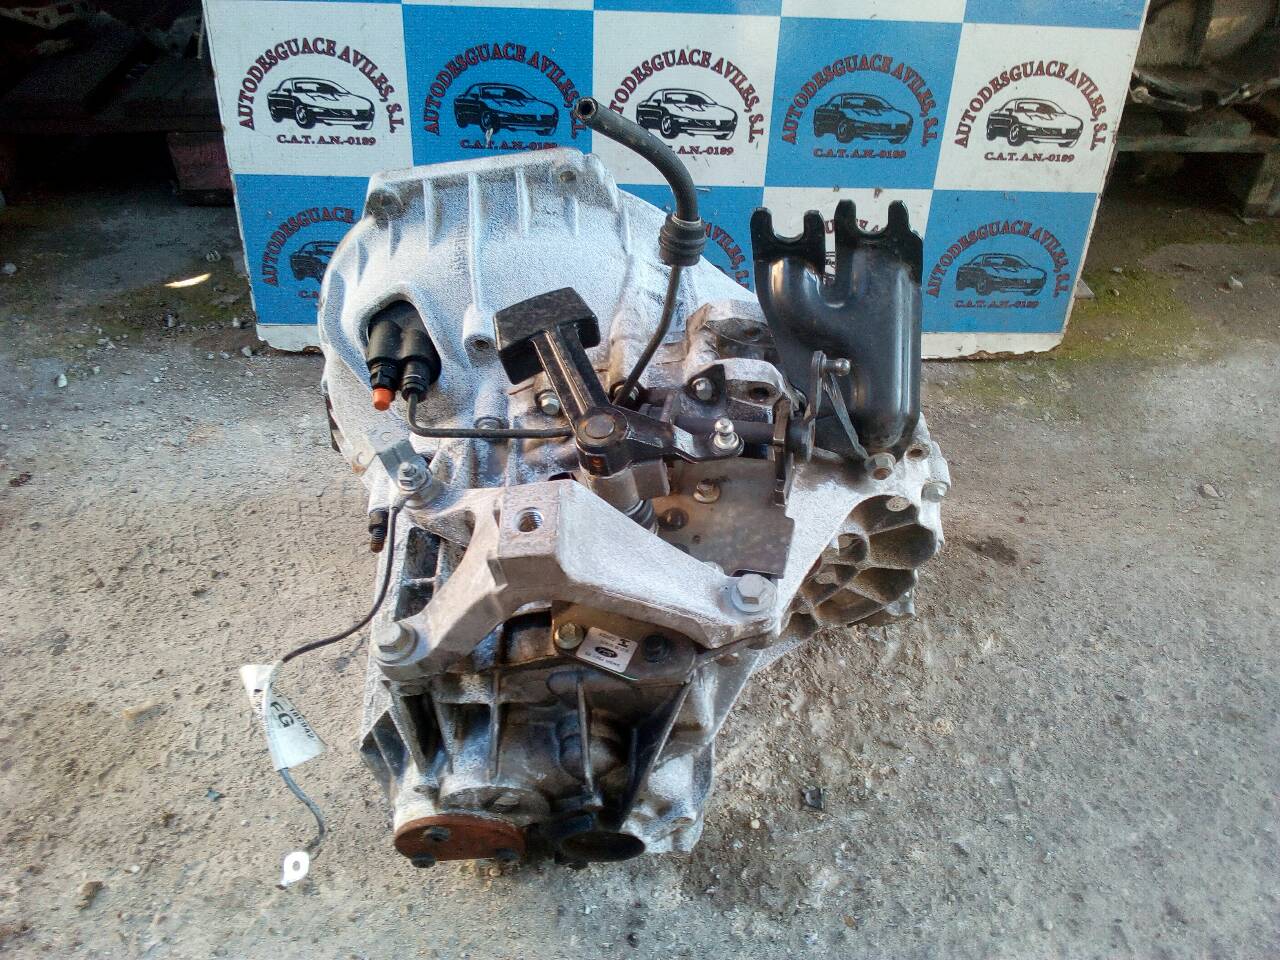 FORD C-Max 1 generation (2003-2010) Gearbox 6M5R7002ZB 22622071